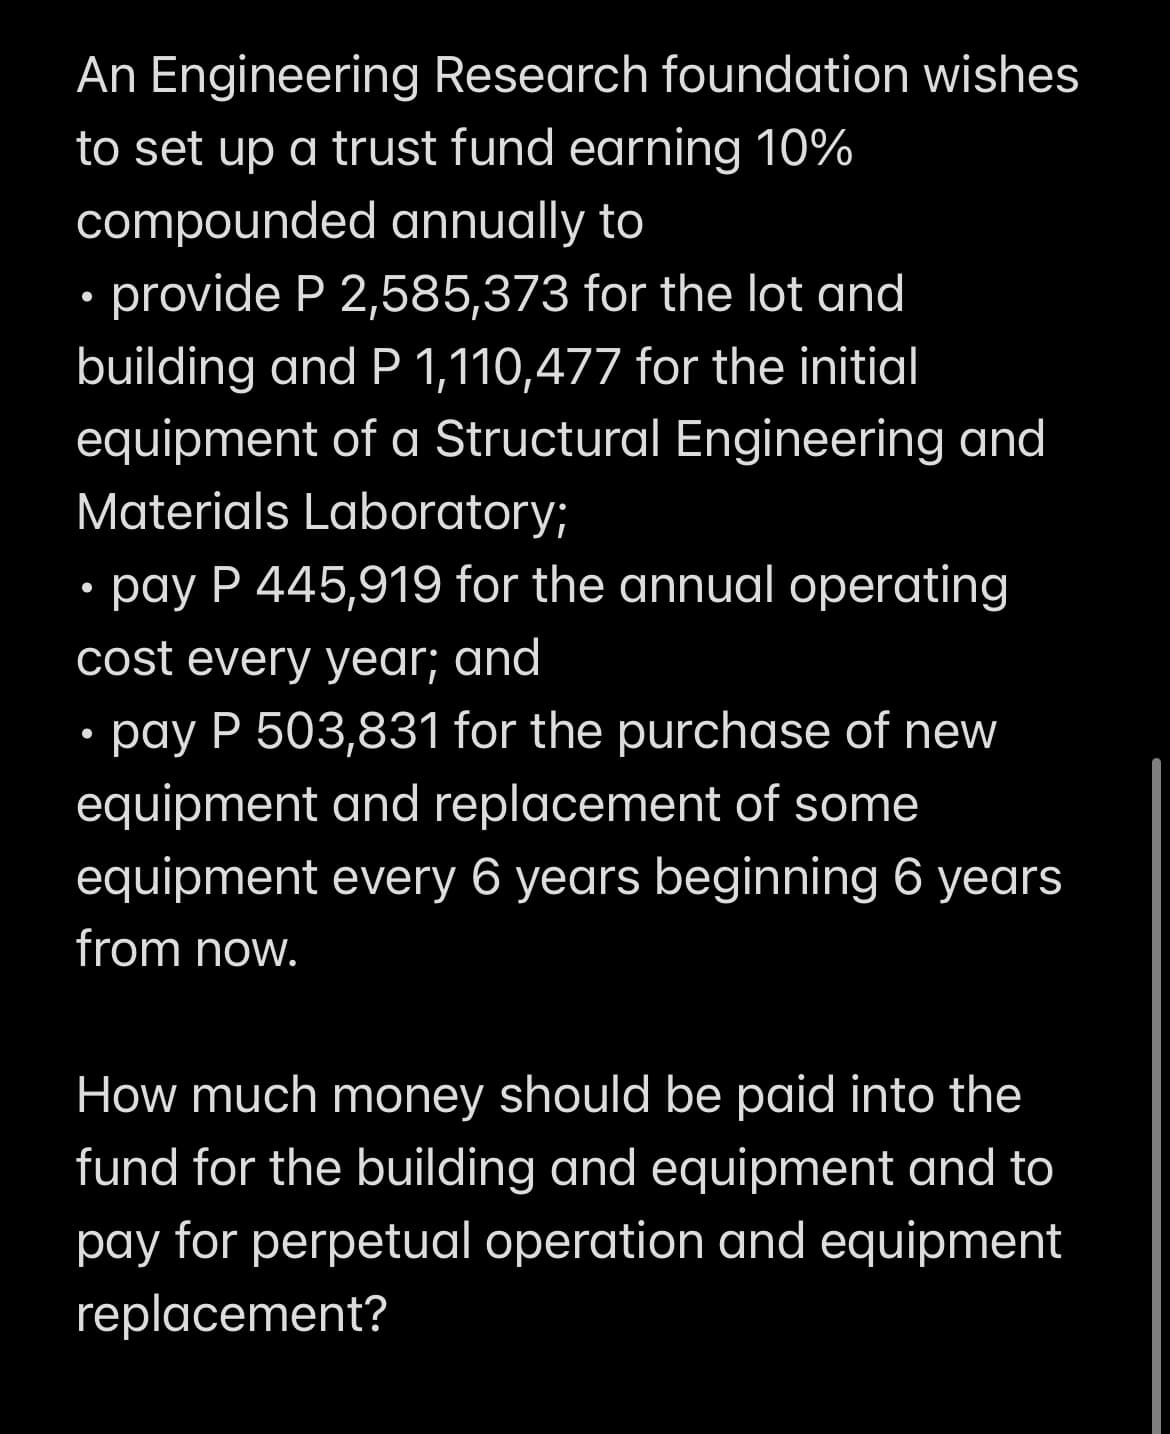 An Engineering Research foundation wishes
to set up a trust fund earning 10%
compounded annually to
• provide P 2,585,373 for the lot and
building and P 1,110,477 for the initial
equipment of a Structural Engineering and
Materials Laboratory;
• pay P 445,919 for the annual operating
cost every year; and
• pay P 503,831 for the purchase of new
equipment and replacement of some
equipment every 6 years beginning 6 years
from now.
How much money should be paid into the
fund for the building and equipment and to
pay for perpetual operation and equipment
replacement?
